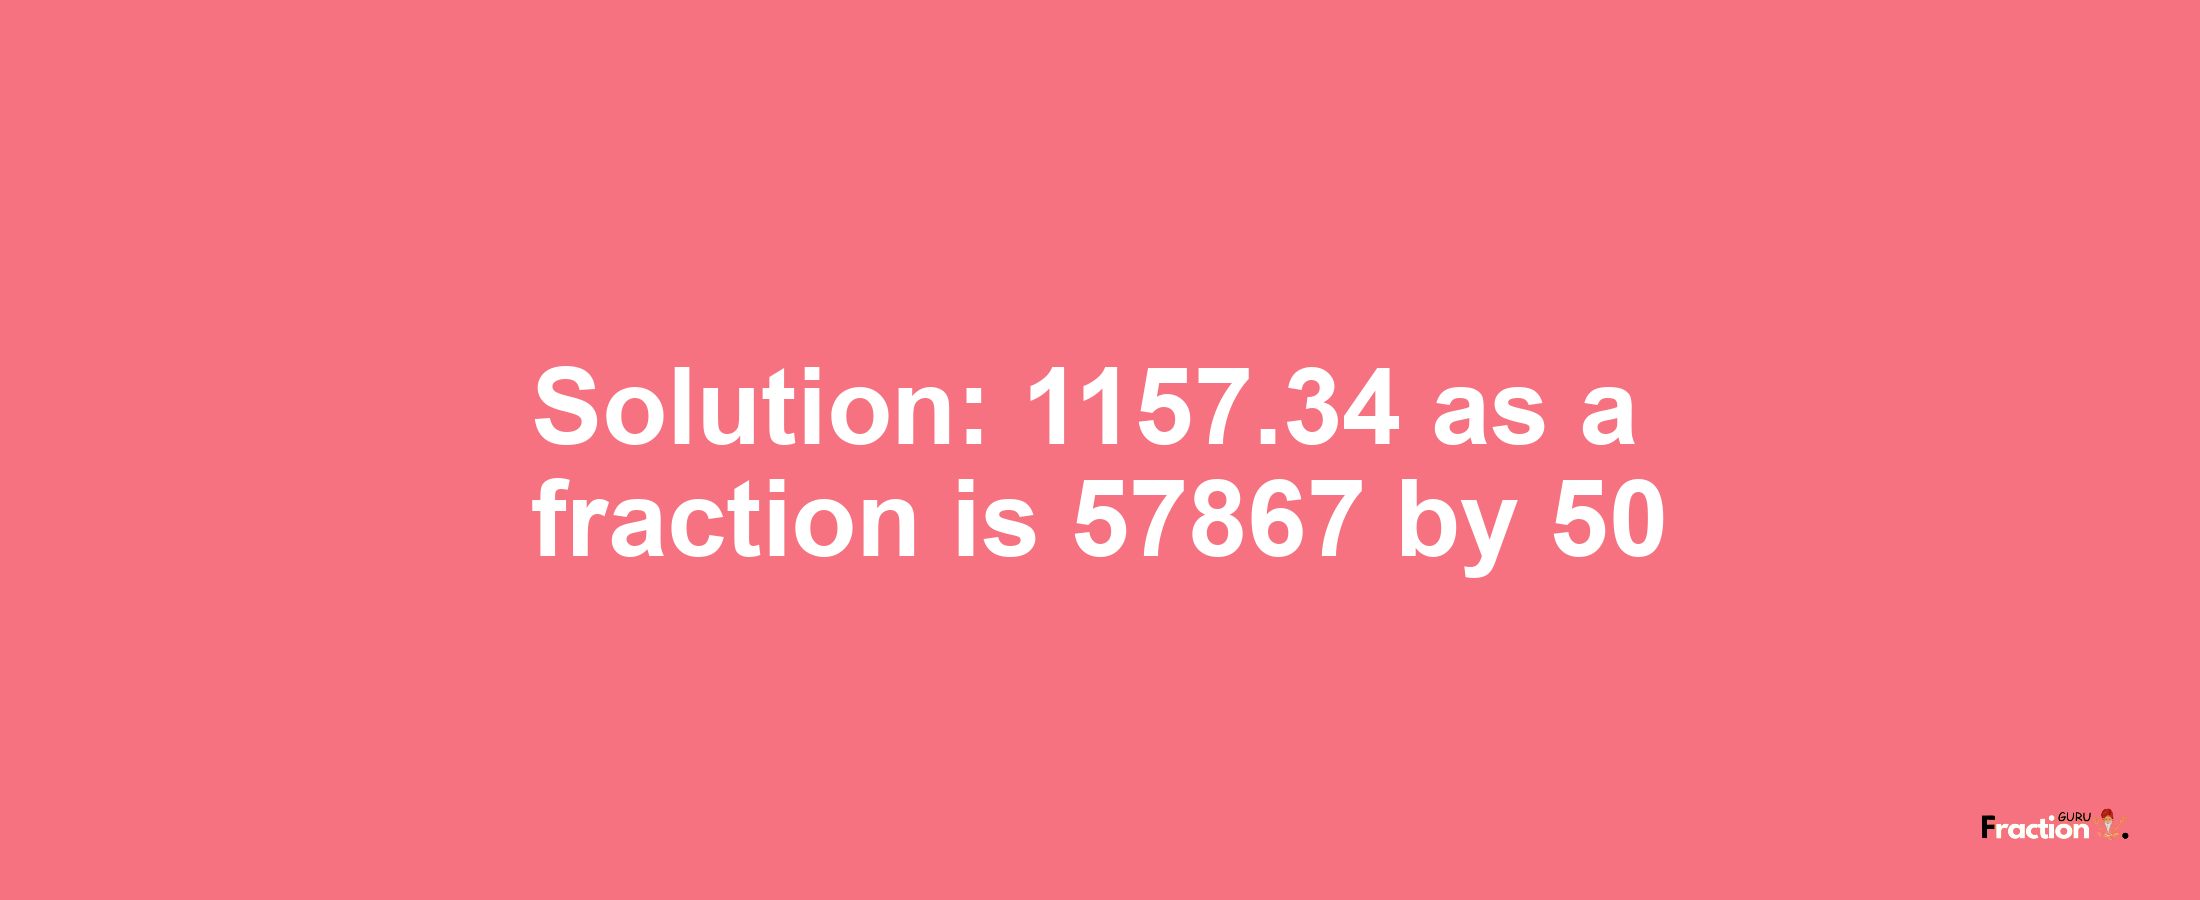 Solution:1157.34 as a fraction is 57867/50